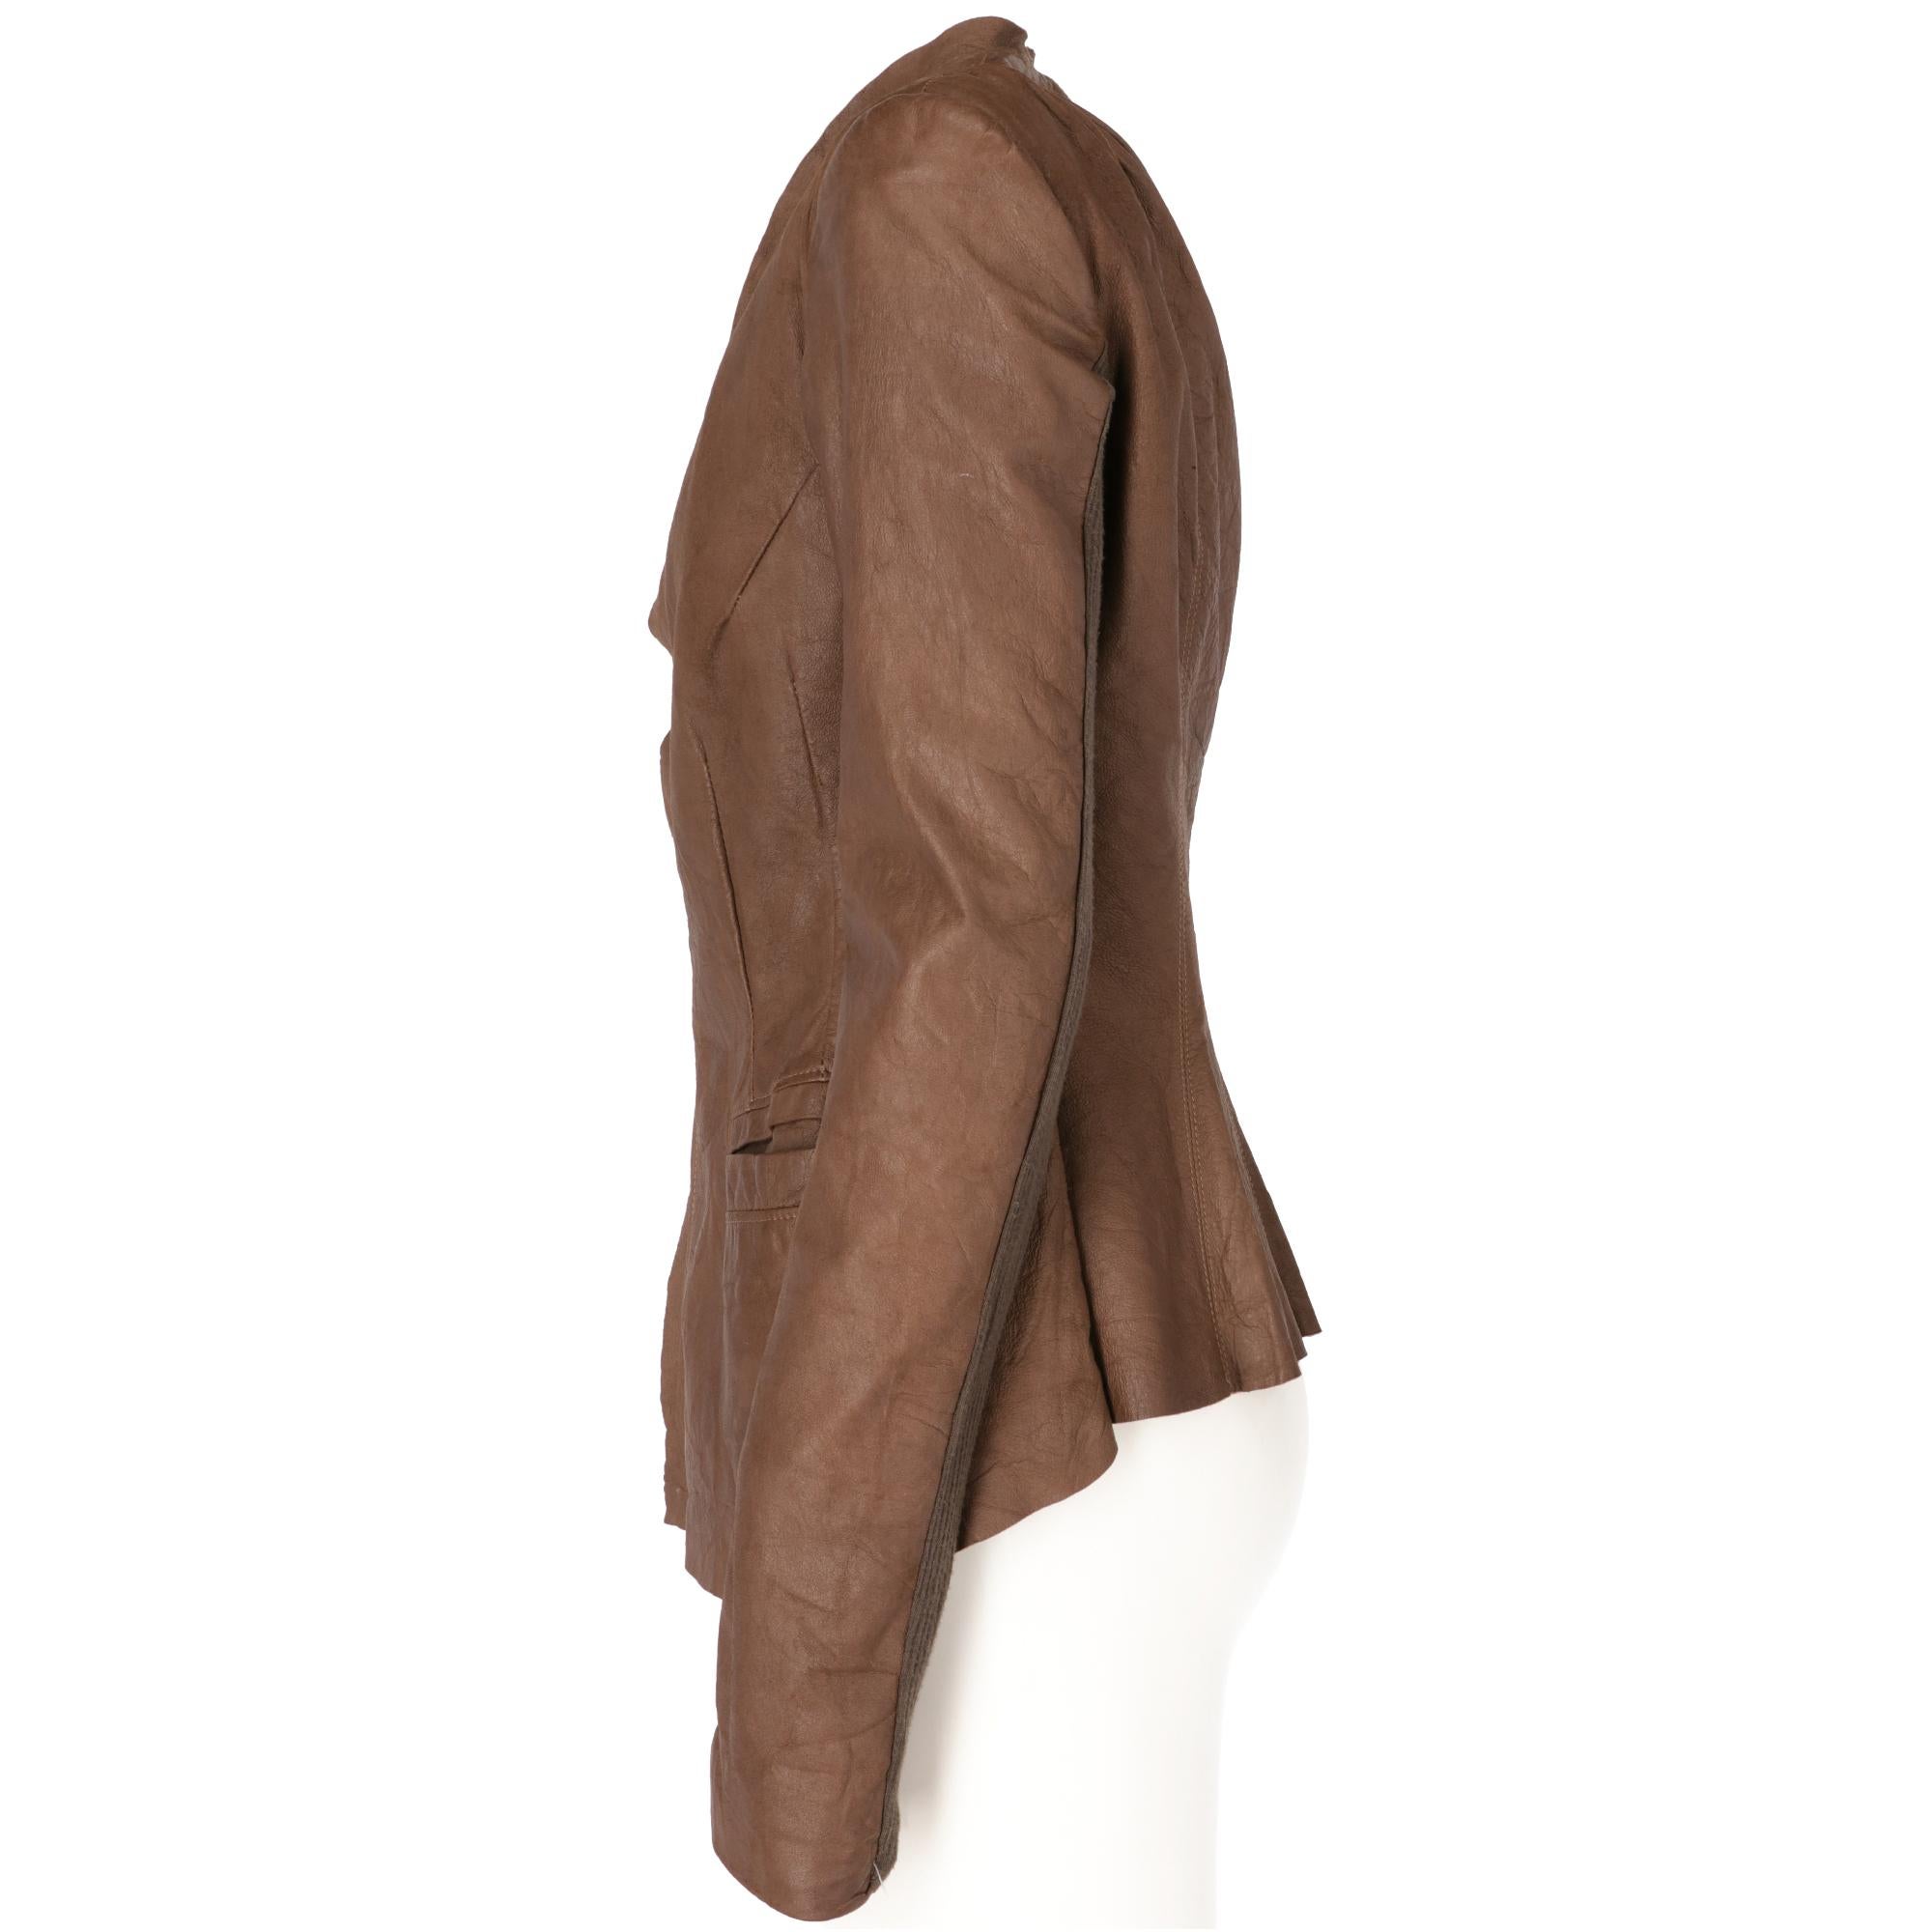 Rick Owens brown genuine leather jacket with a slightly flared cut, visible decorative stitching and raw-cut edges, front closure with hook, long sleeves with ribbed fabric insert, welt pockets, padded shoulder and semi lined interior with logoed